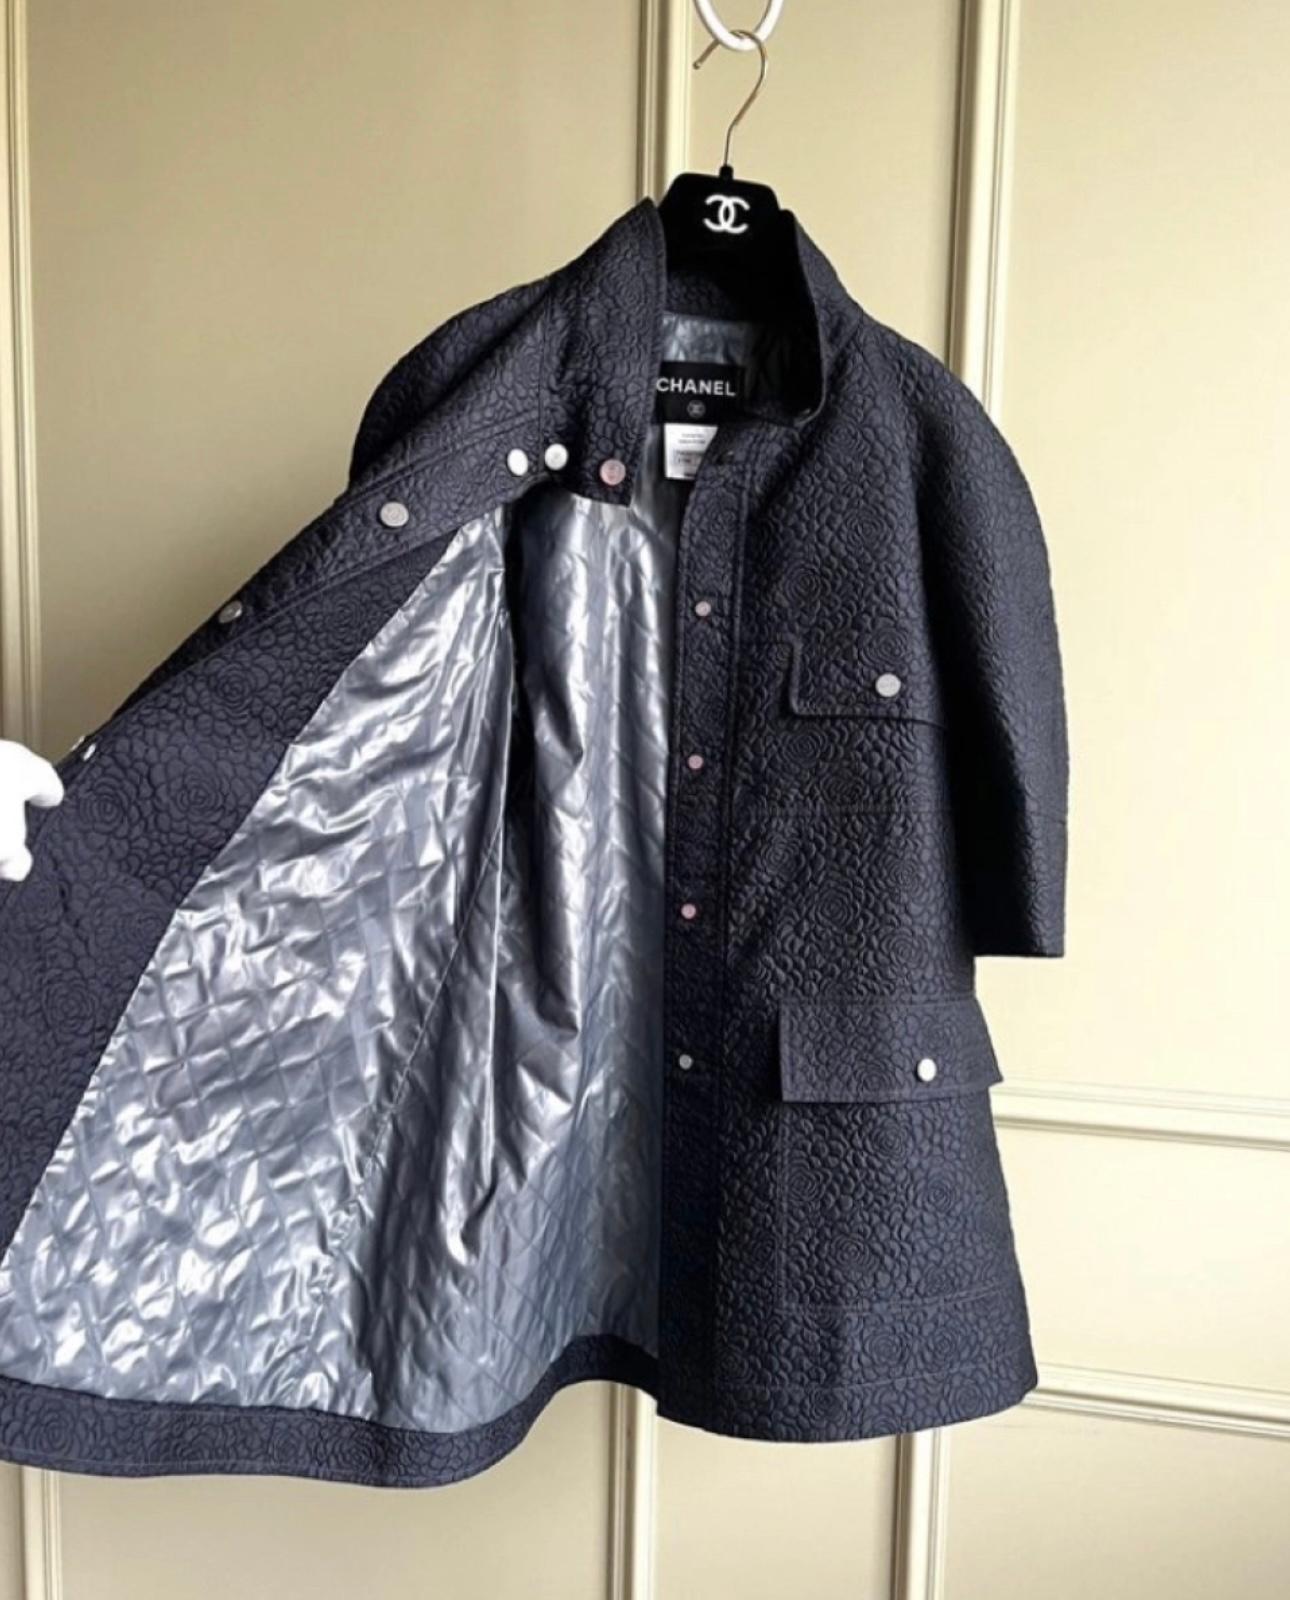 Chanel Iconic Cocoon Style Black Coat with Camellias Pattern For Sale 7